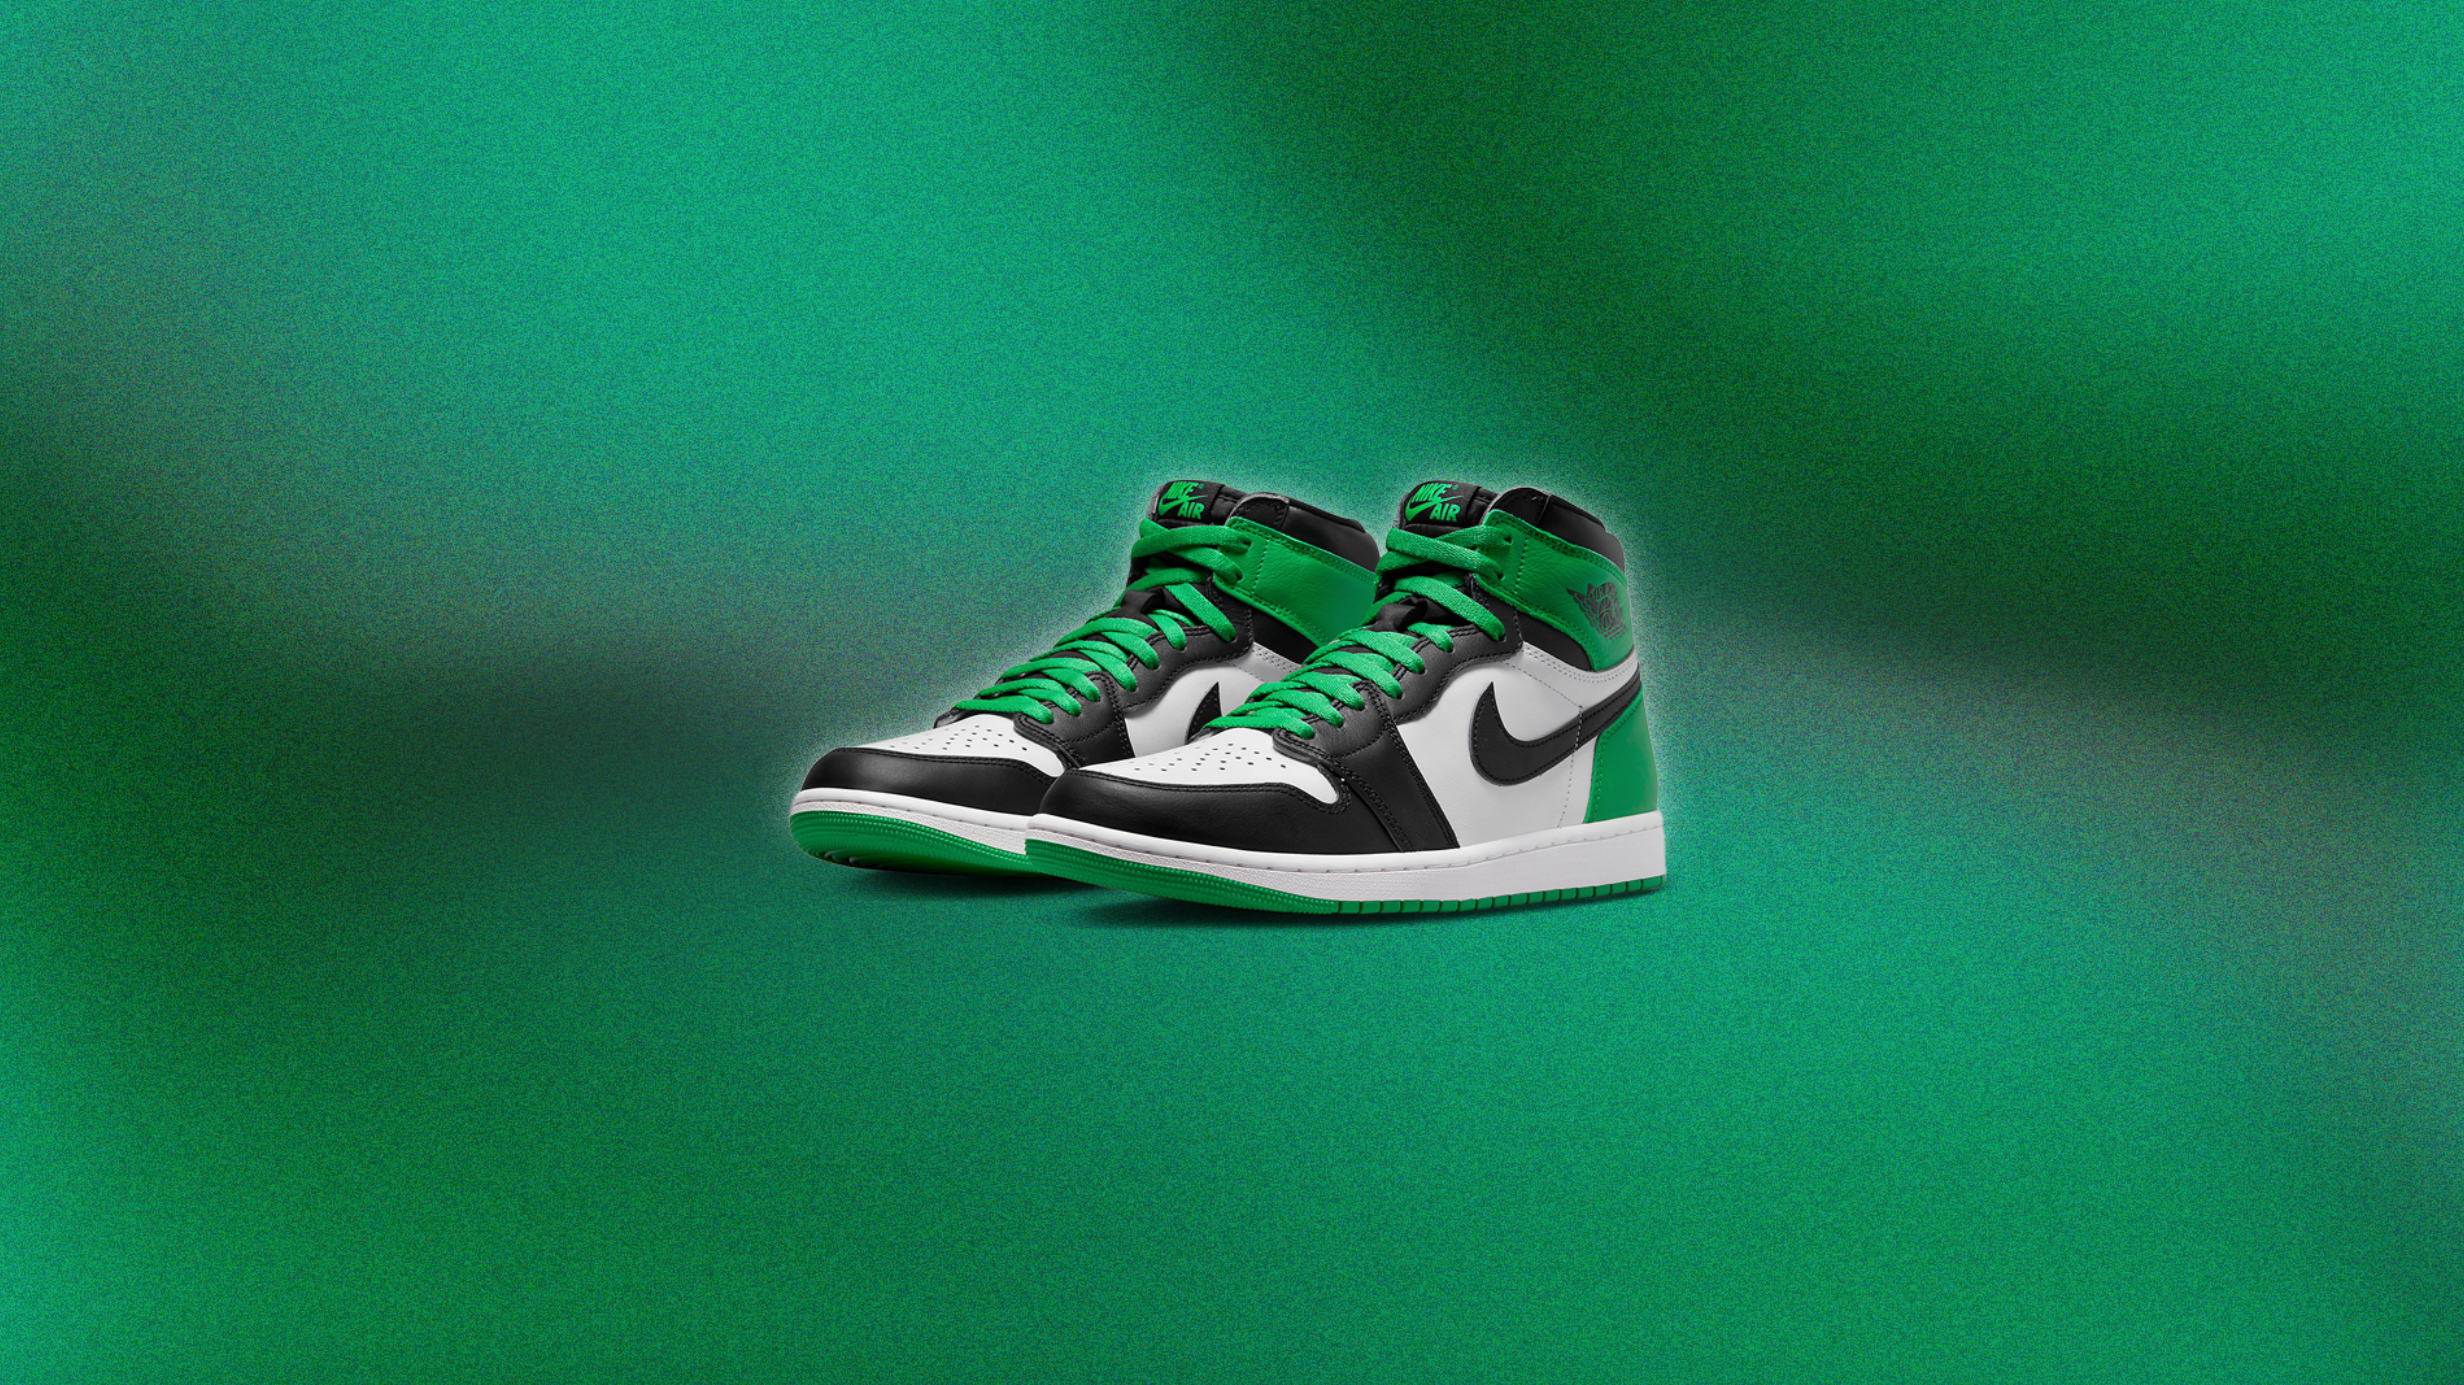 The Nike Air Jordan High Lucky Green Is Blood Brother To